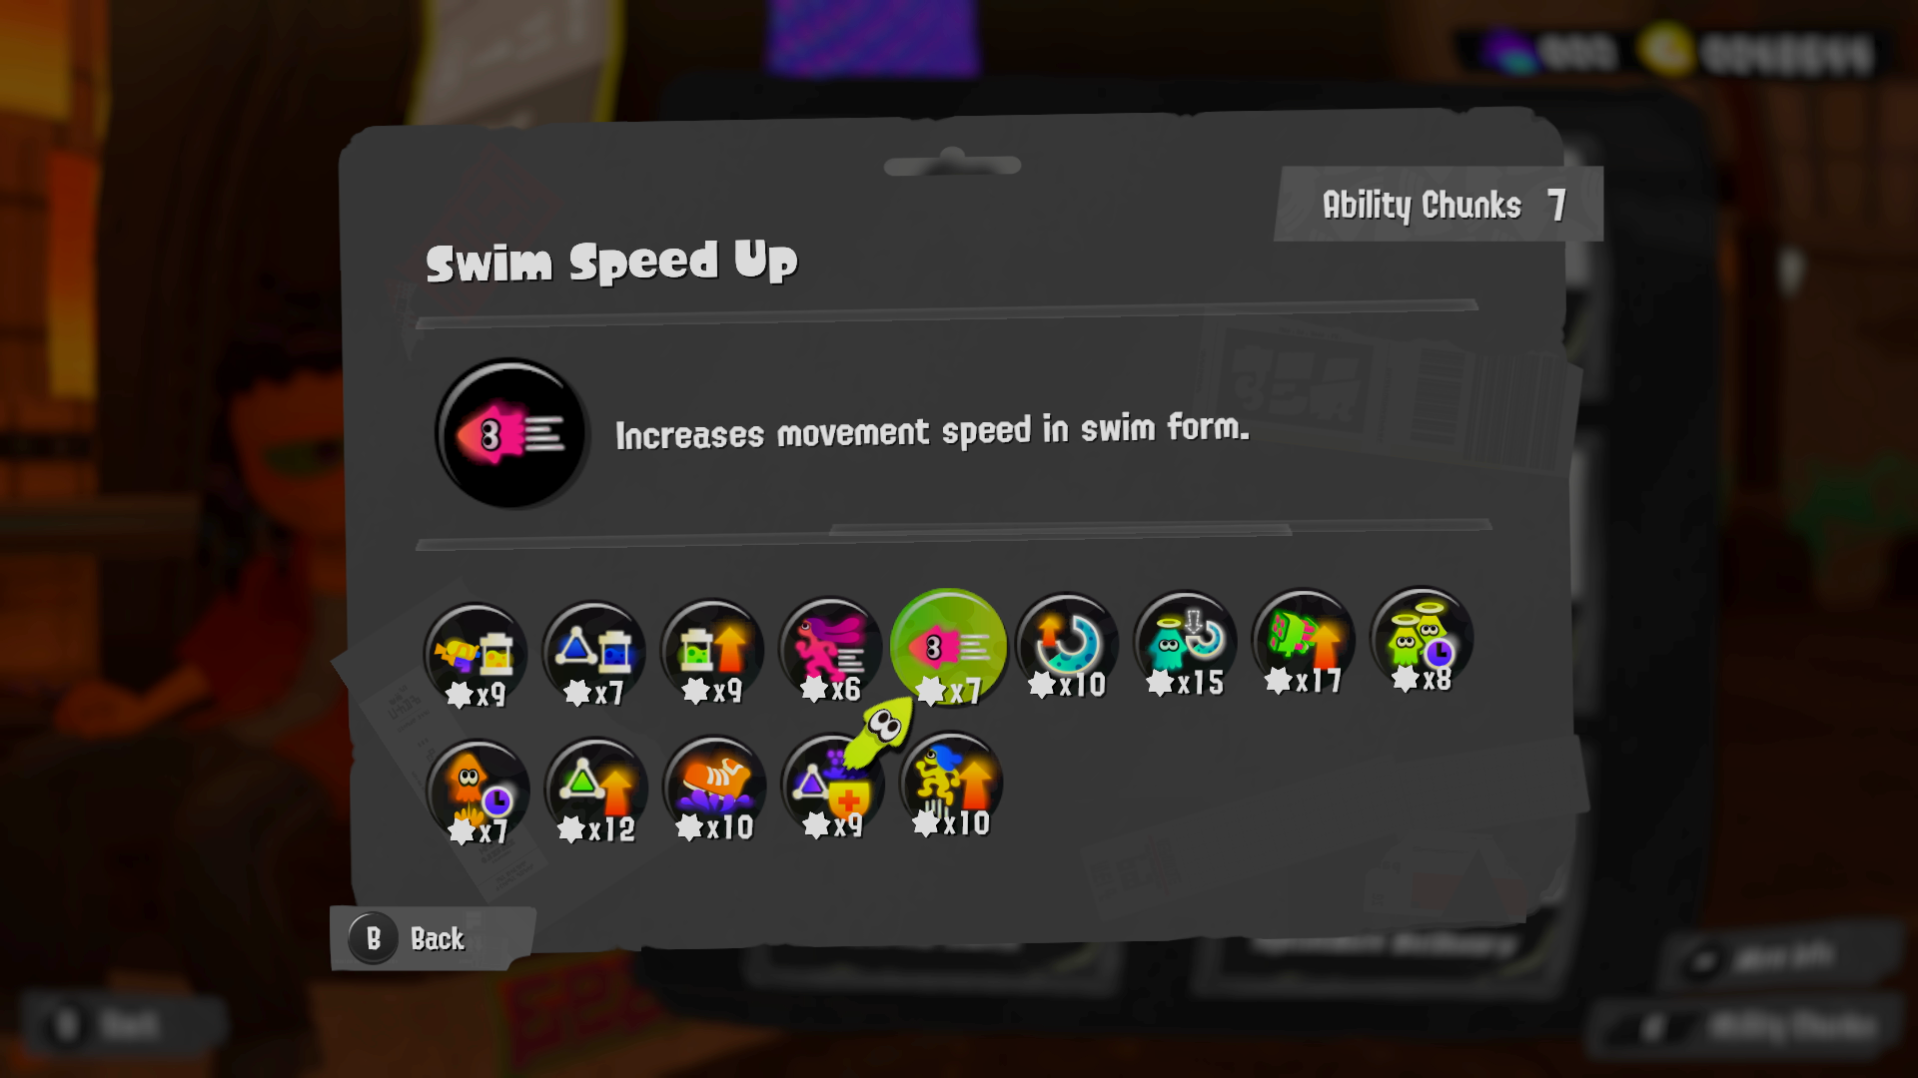 A menu screen of various Splatoon 3 Ability Chunks. Swim Speed Up is specifically highlighted.